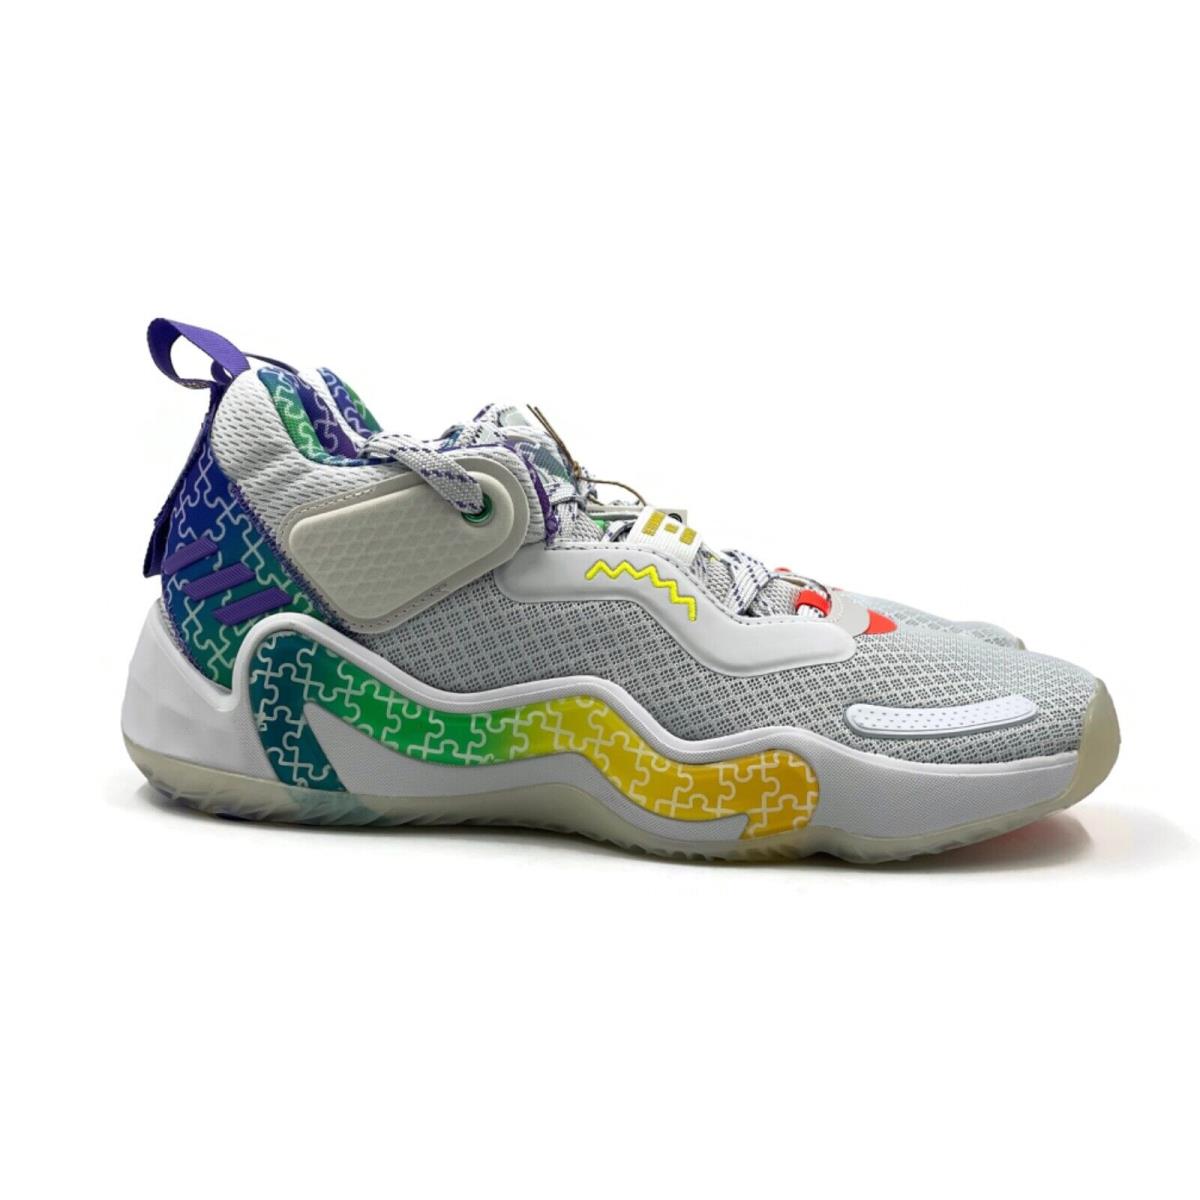 Adidas D.o.n Issue 3 Mens Basketball Shoe Gray Multicolor Sneaker Trainer